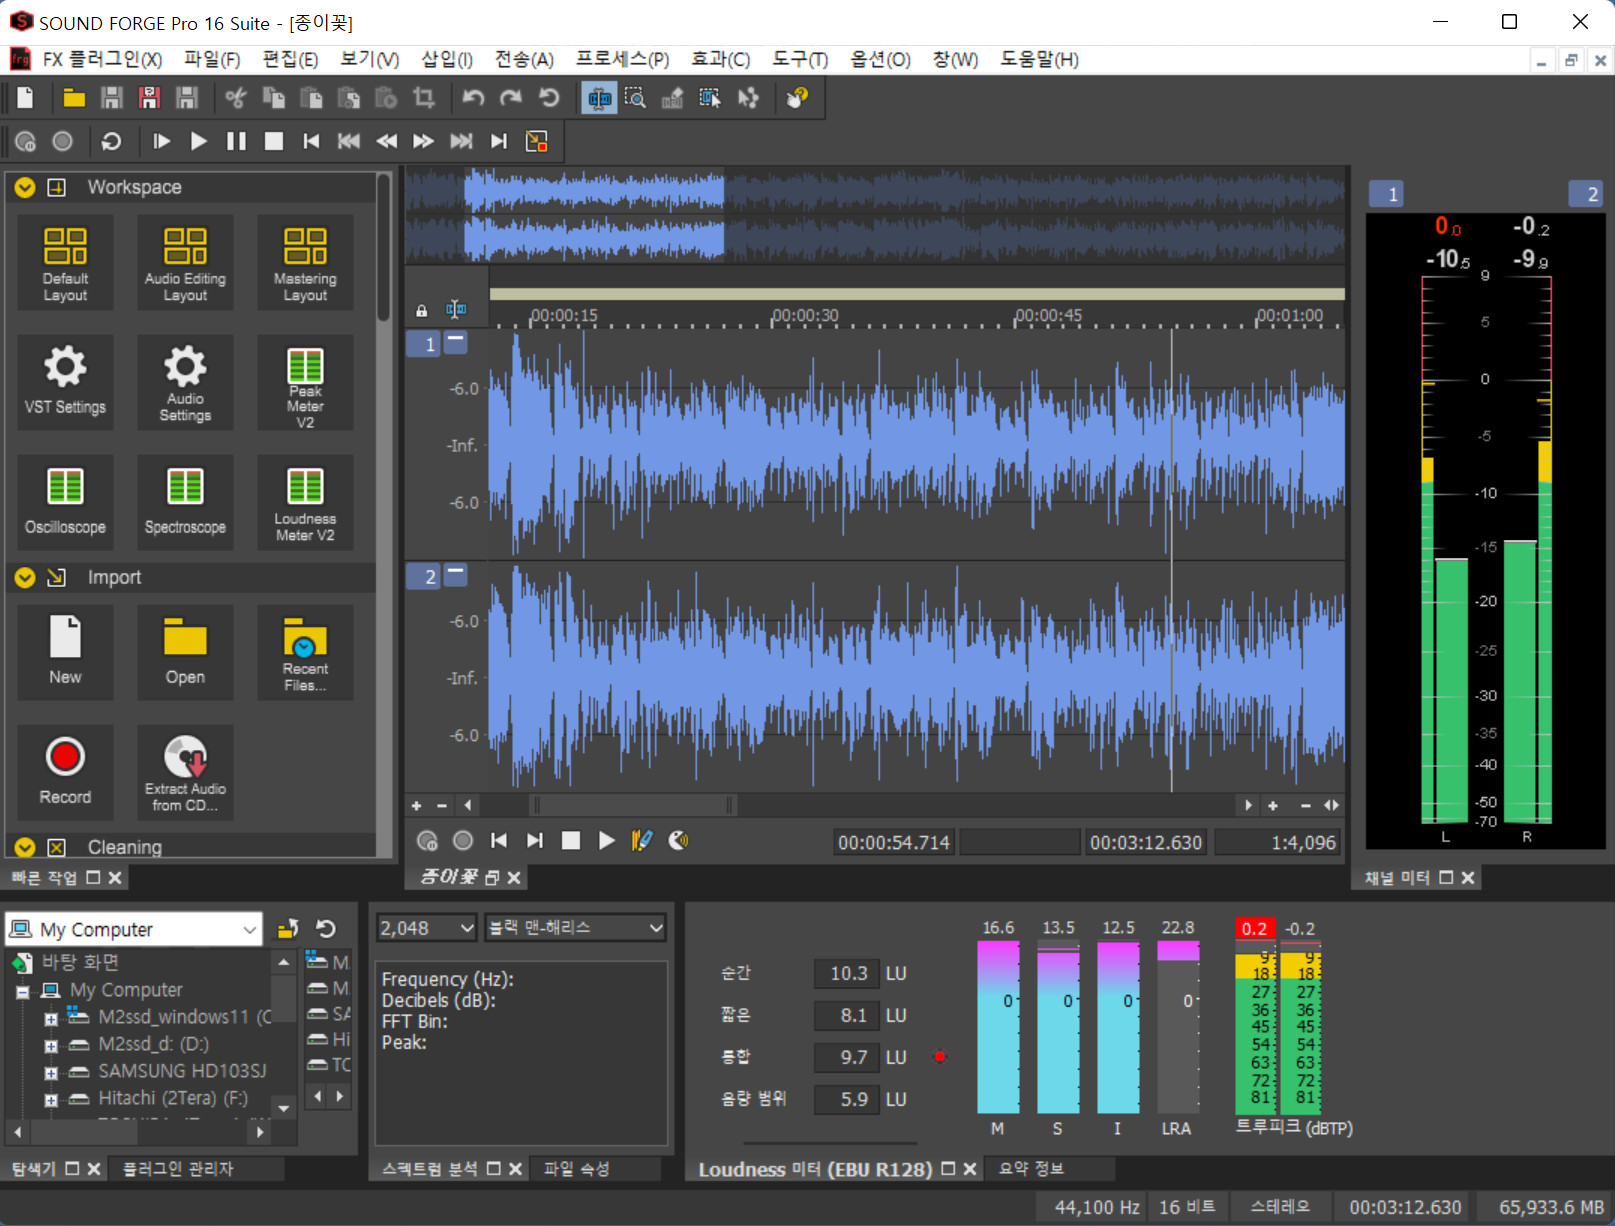 MAGIX SOUND FORGE Pro Suite 17.0.2.109 instal the new version for apple